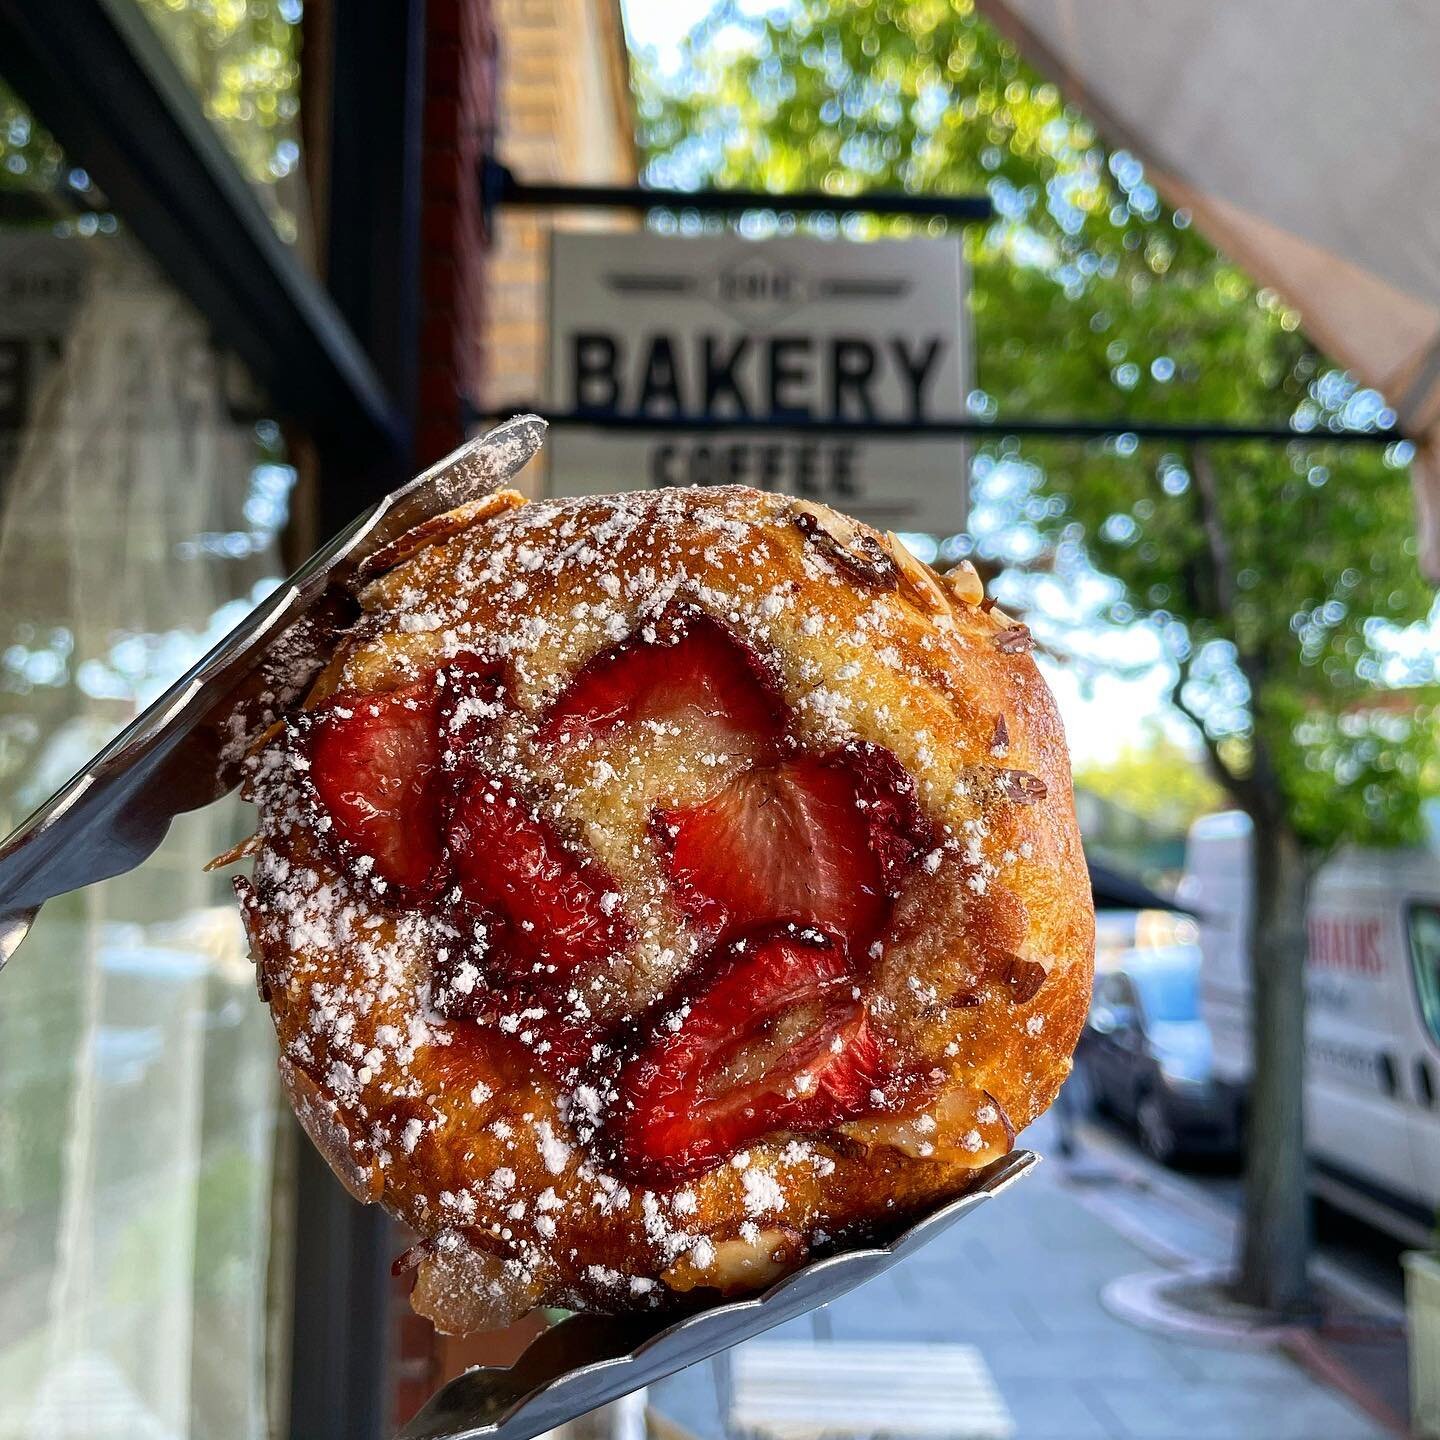 Strawberry Almond Frangipane Brioche (weekends only!) These are sooooo tasty, especially when toasted up a bit the next day 🤯🍓 👏🏽